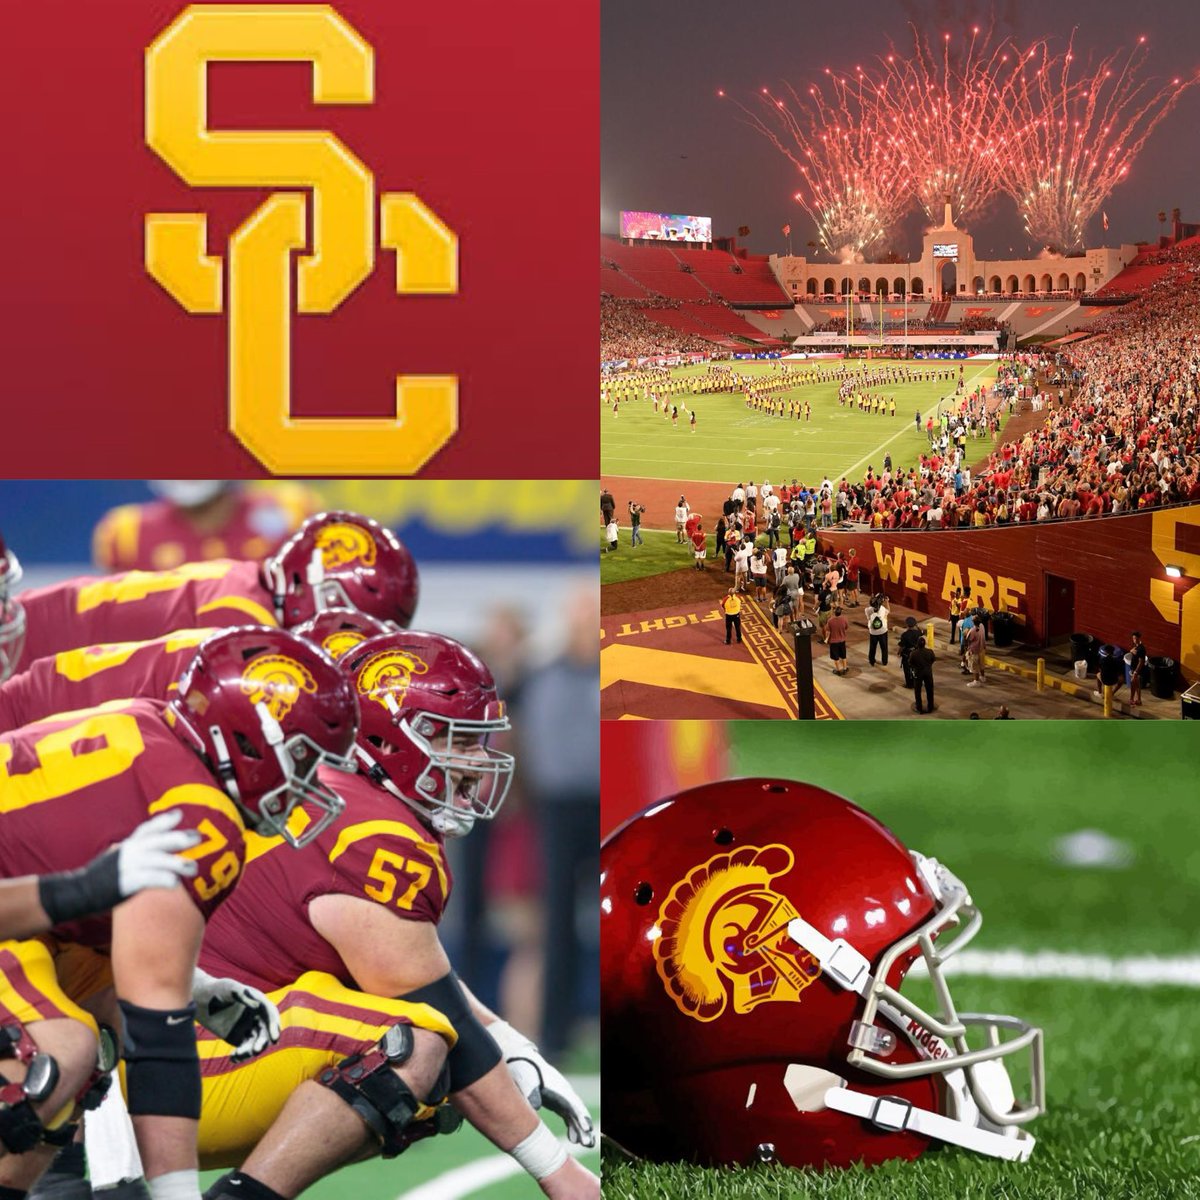 Truly blessed and honored to receive an offer from the University of Southern California #FightOn ✌🏽 @Coach_Henson @LincolnRiley @AaronAmaama @uscfb @skyridgefb @coachjhemm @JonLehman @BigT2k76 @kanuch78 @Kneeyou77 @adamgorney @BlairAngulo @BrandonHuffman @ChadSimmons_